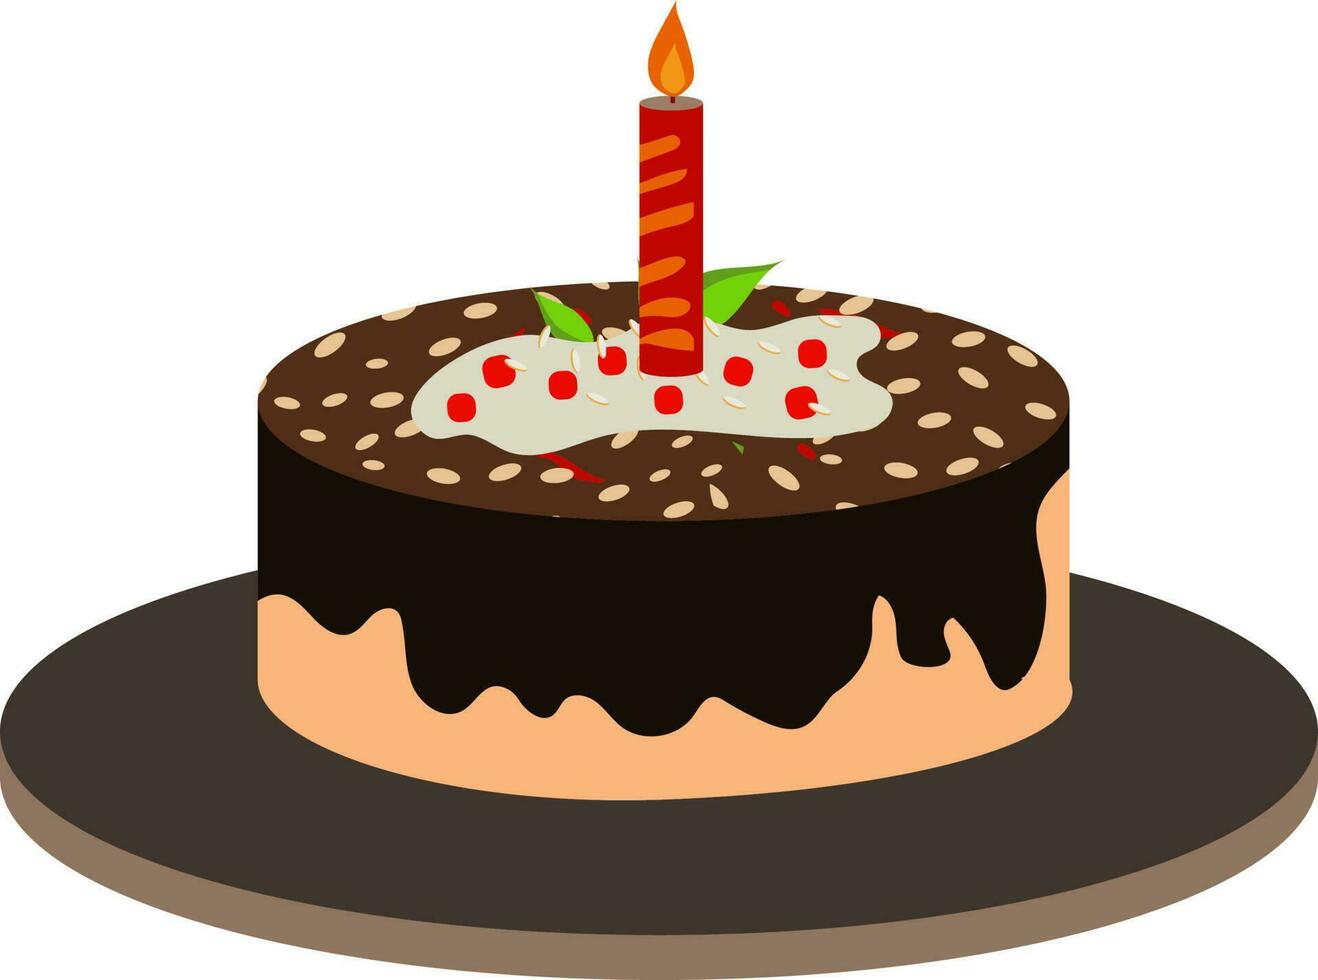 Decorative Cake With Lit Candle Icon On Black Plate. vector